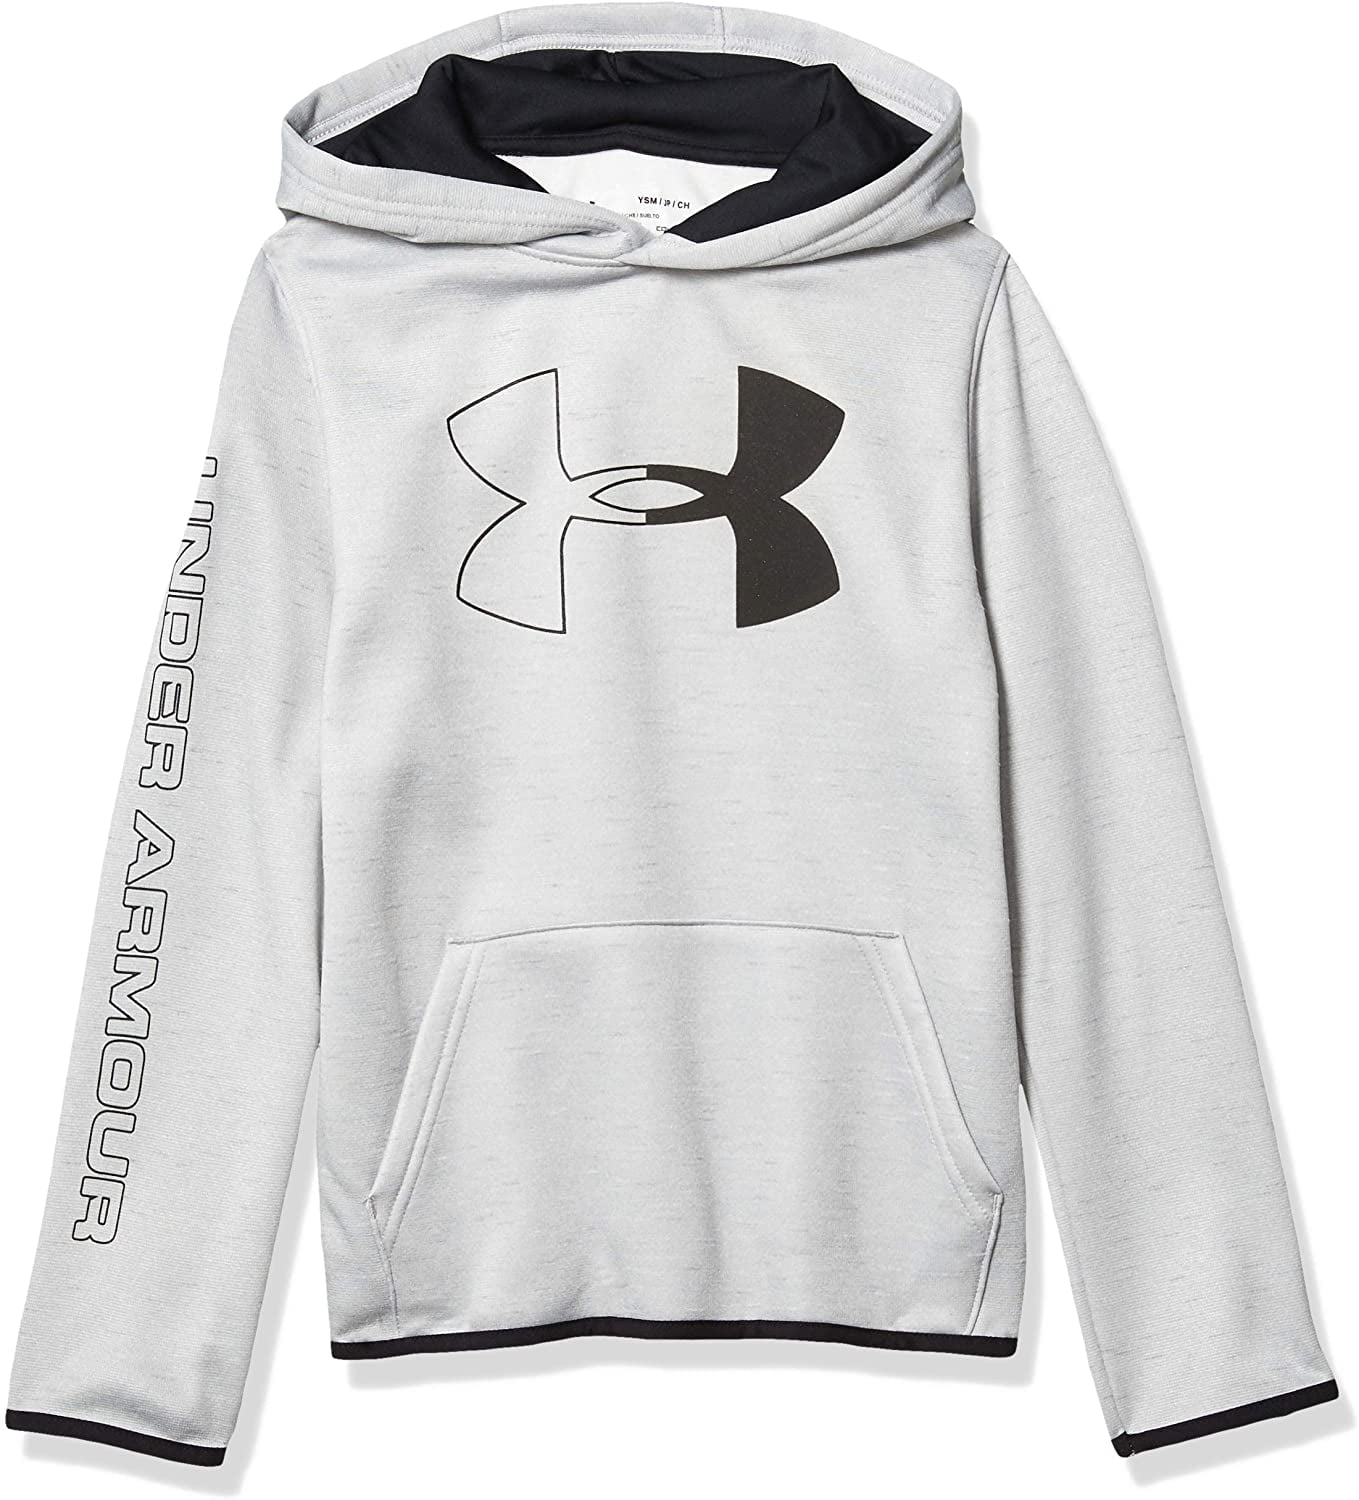 youth large under armour hoodie